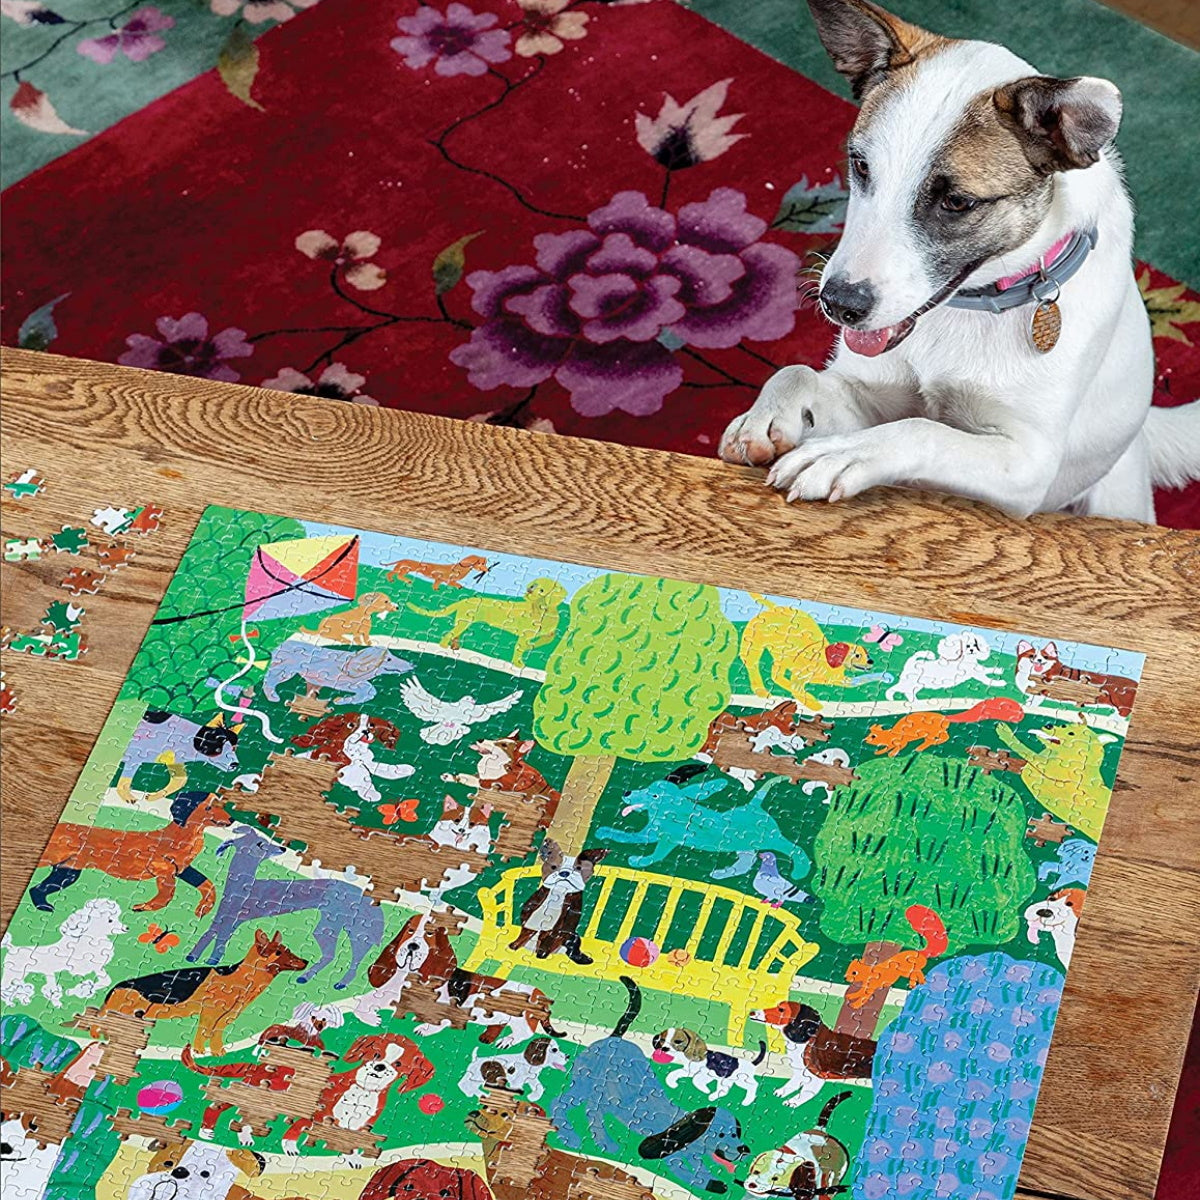 eeBoo Dogs in the Park 1000 Piece Puzzle